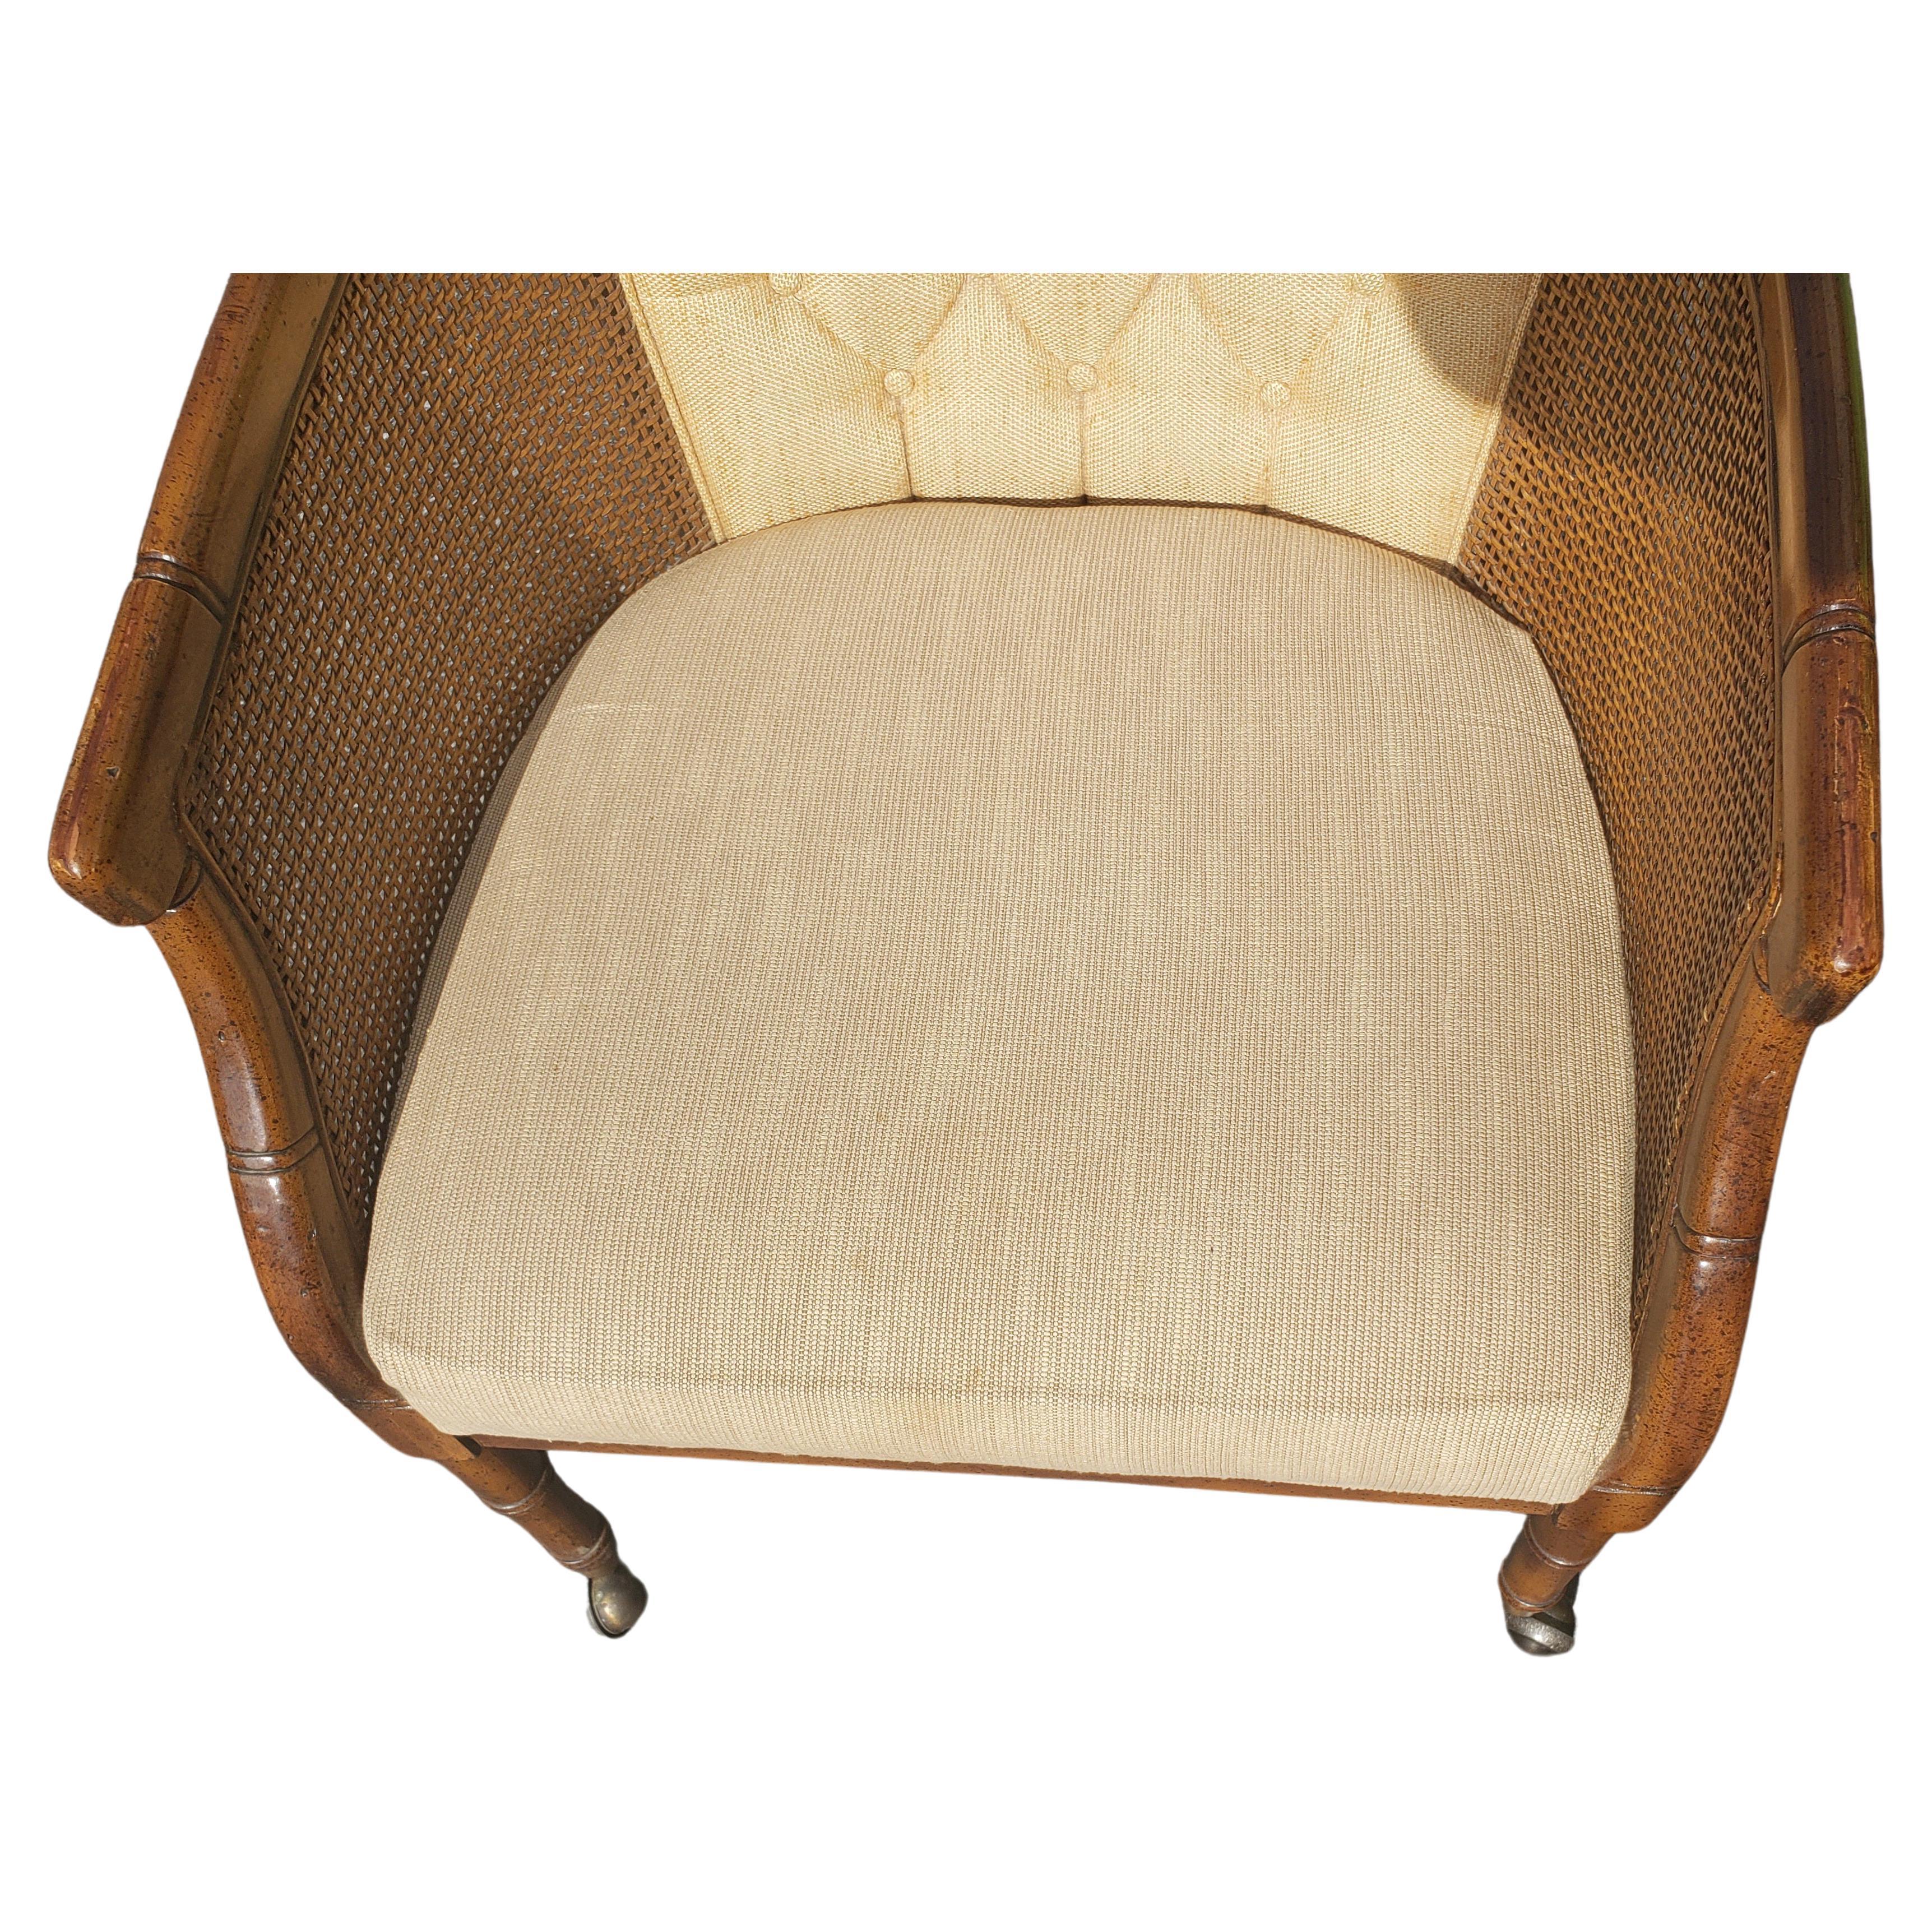 American Henredon French Country Walnut Faux Cane Bamboo Upholstered Club Accent Chairs